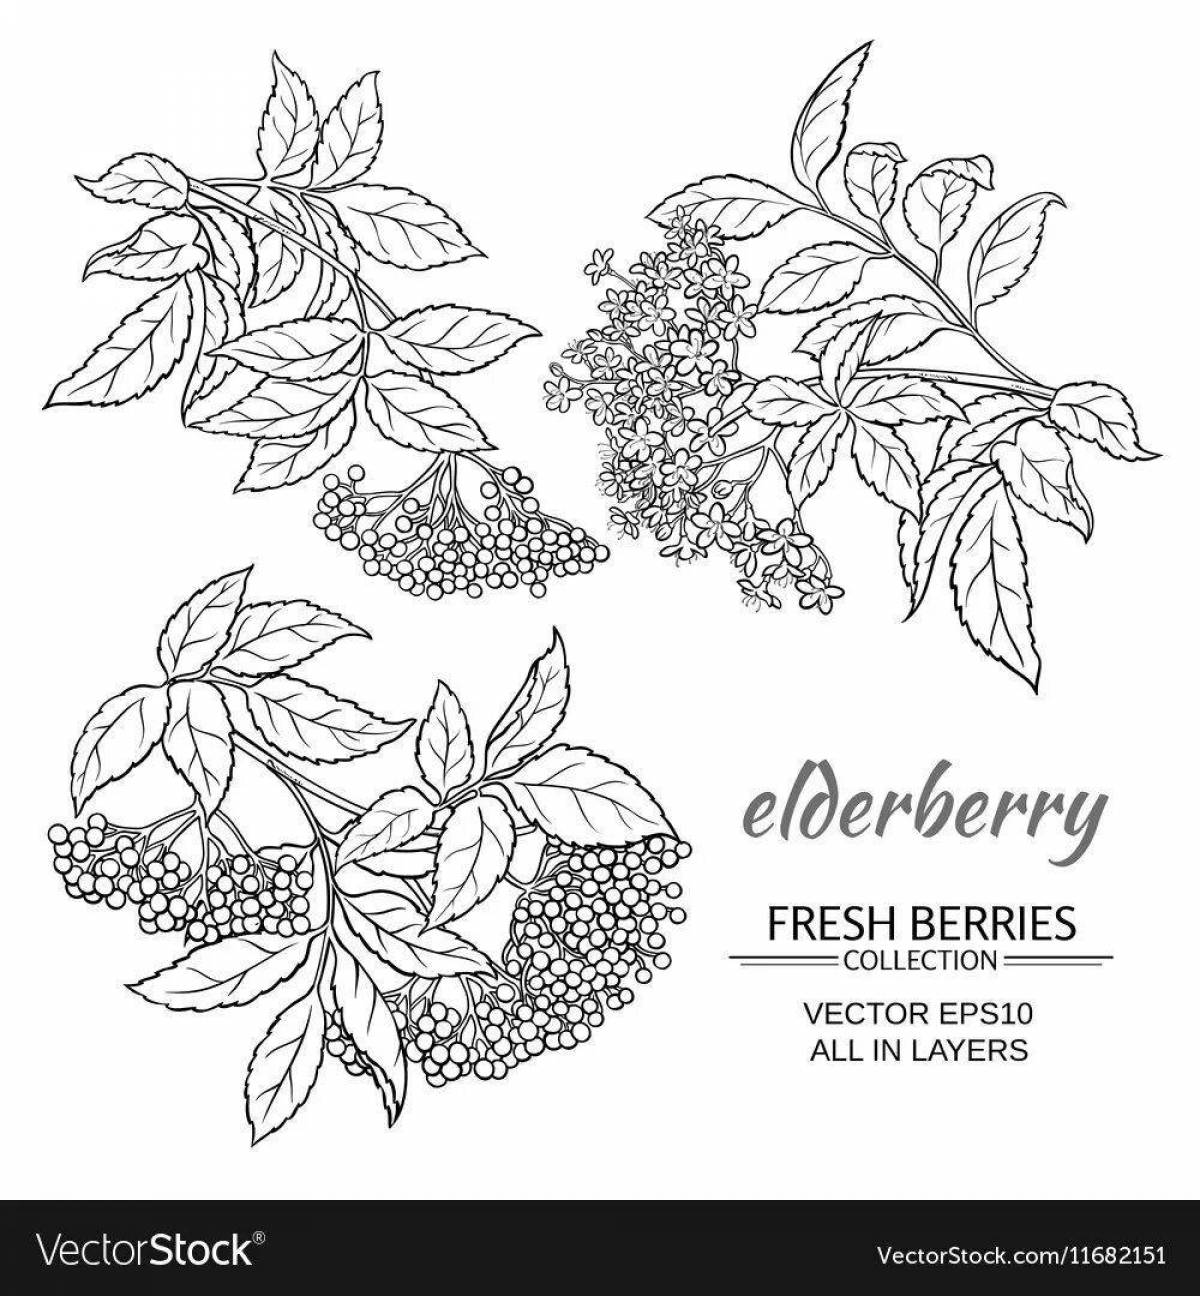 Glowing red elderberry coloring page